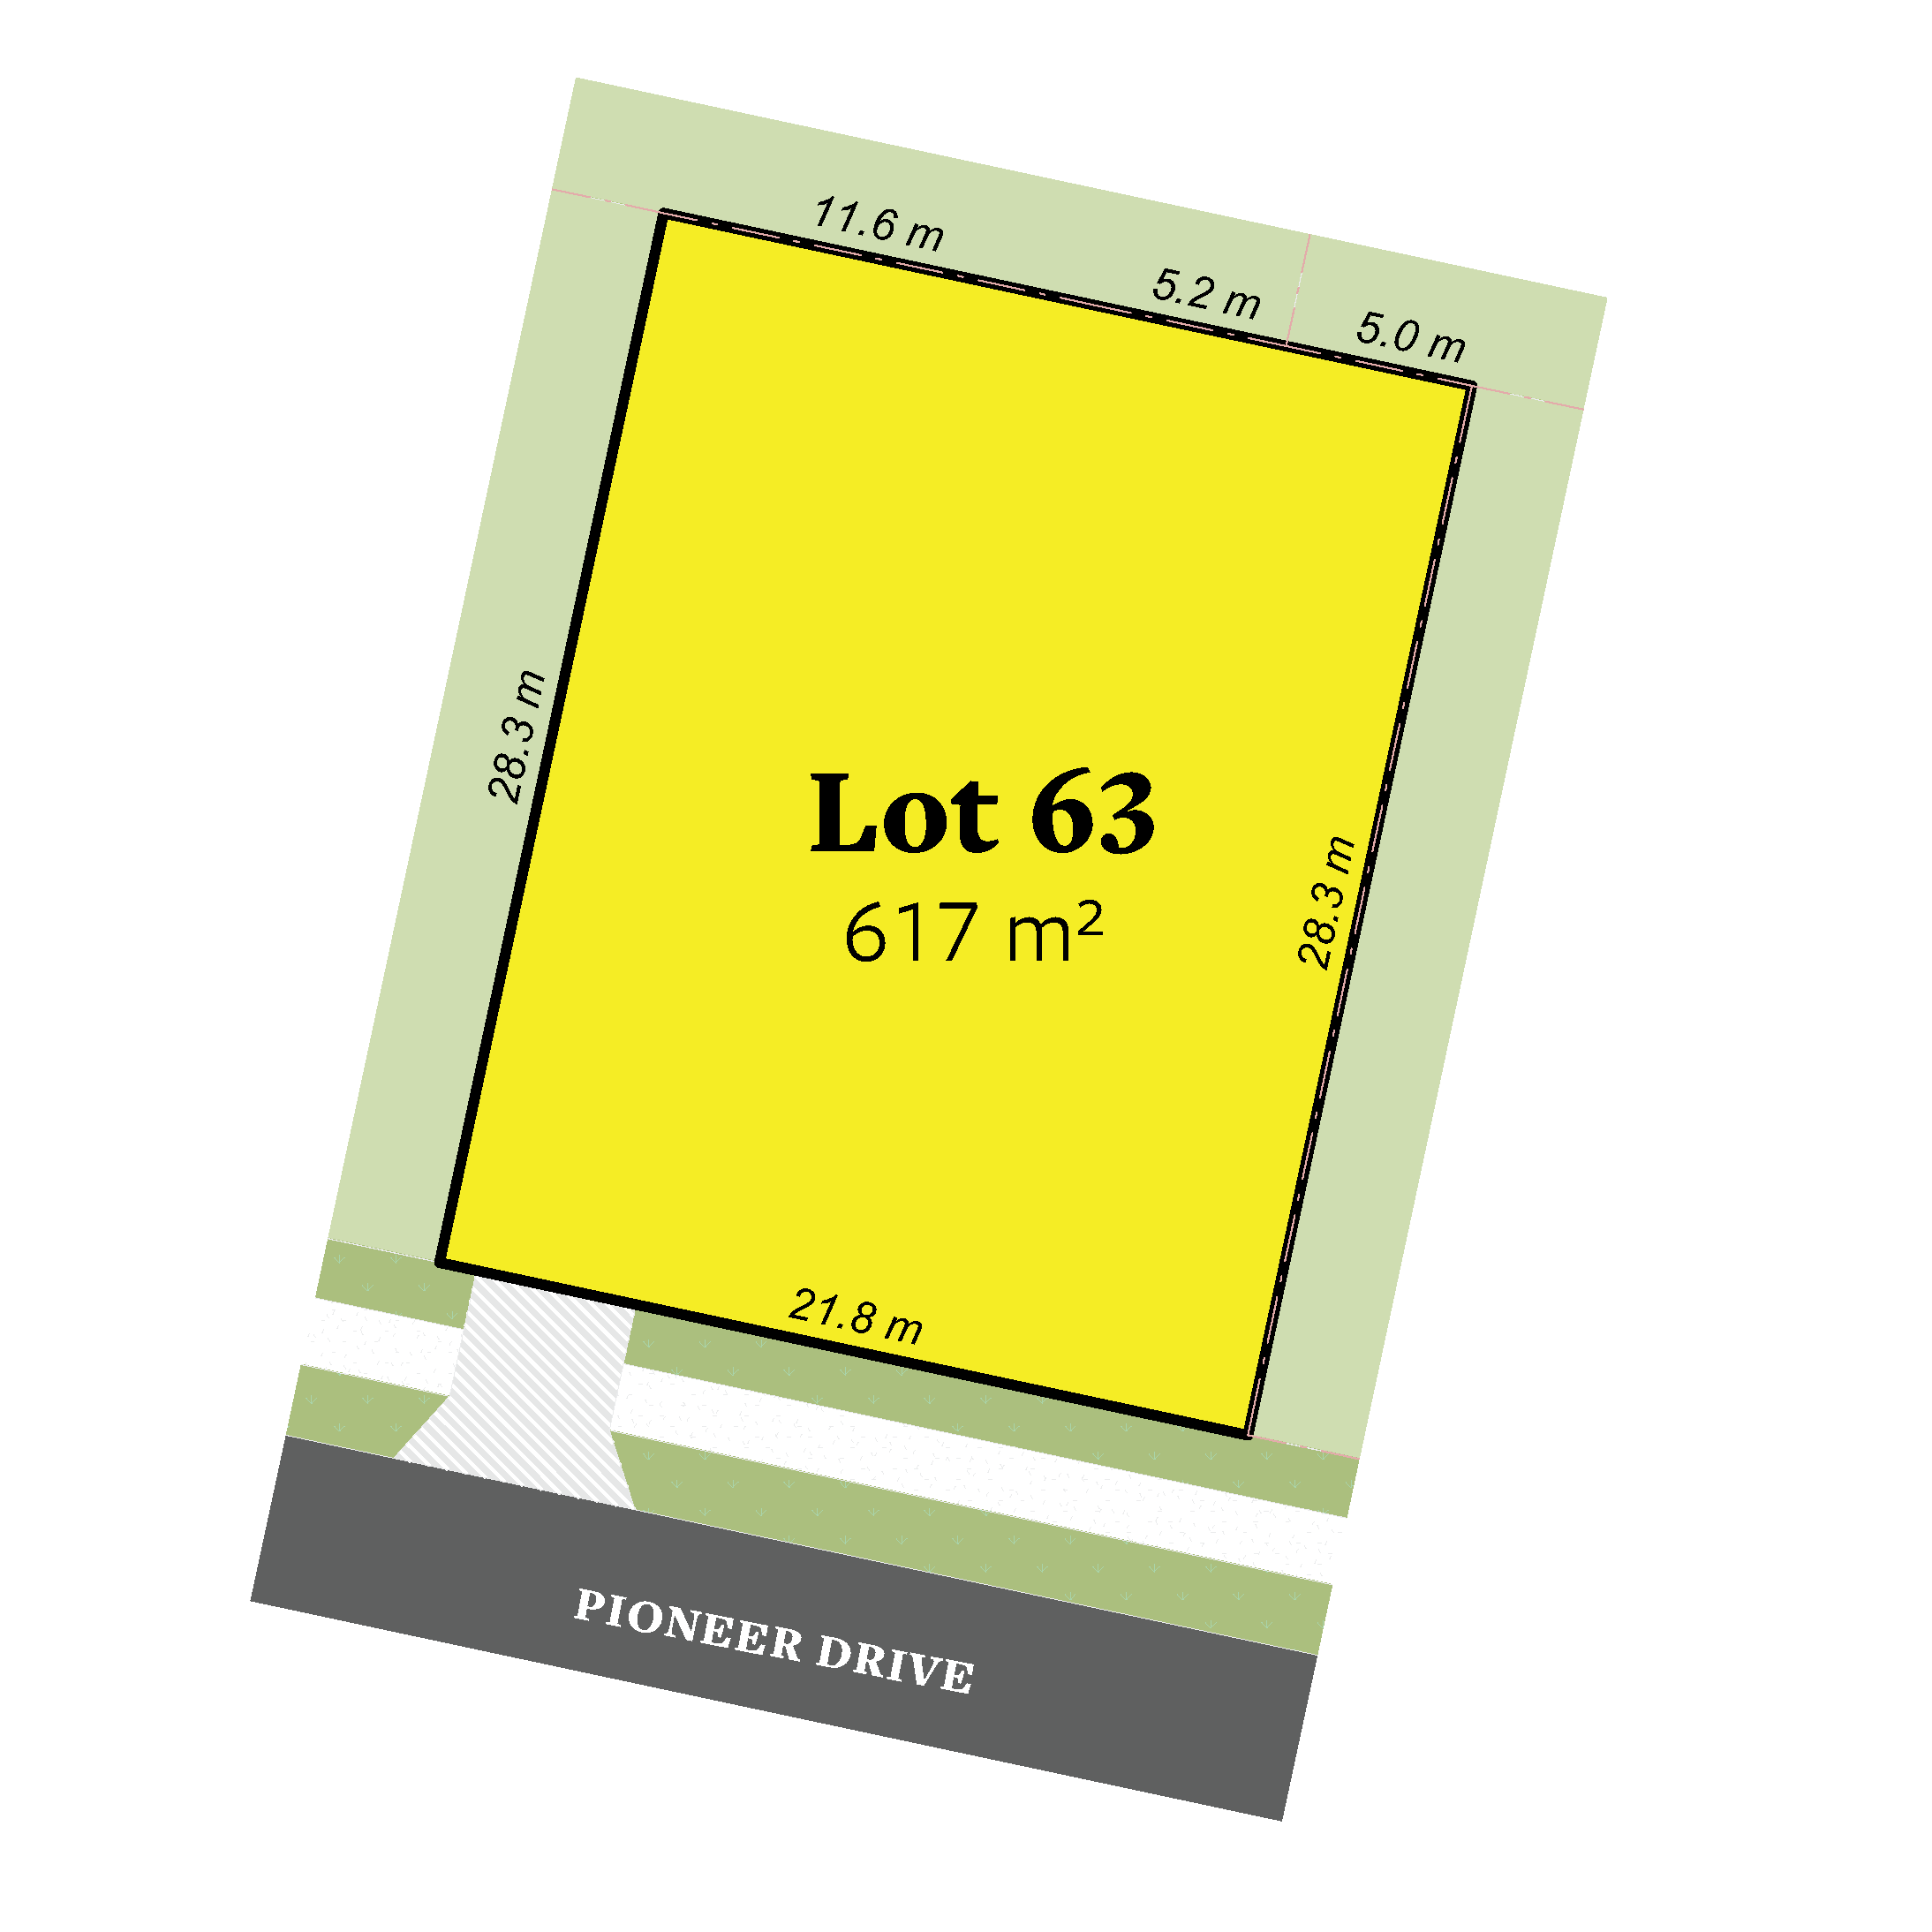 Image of Lot 63